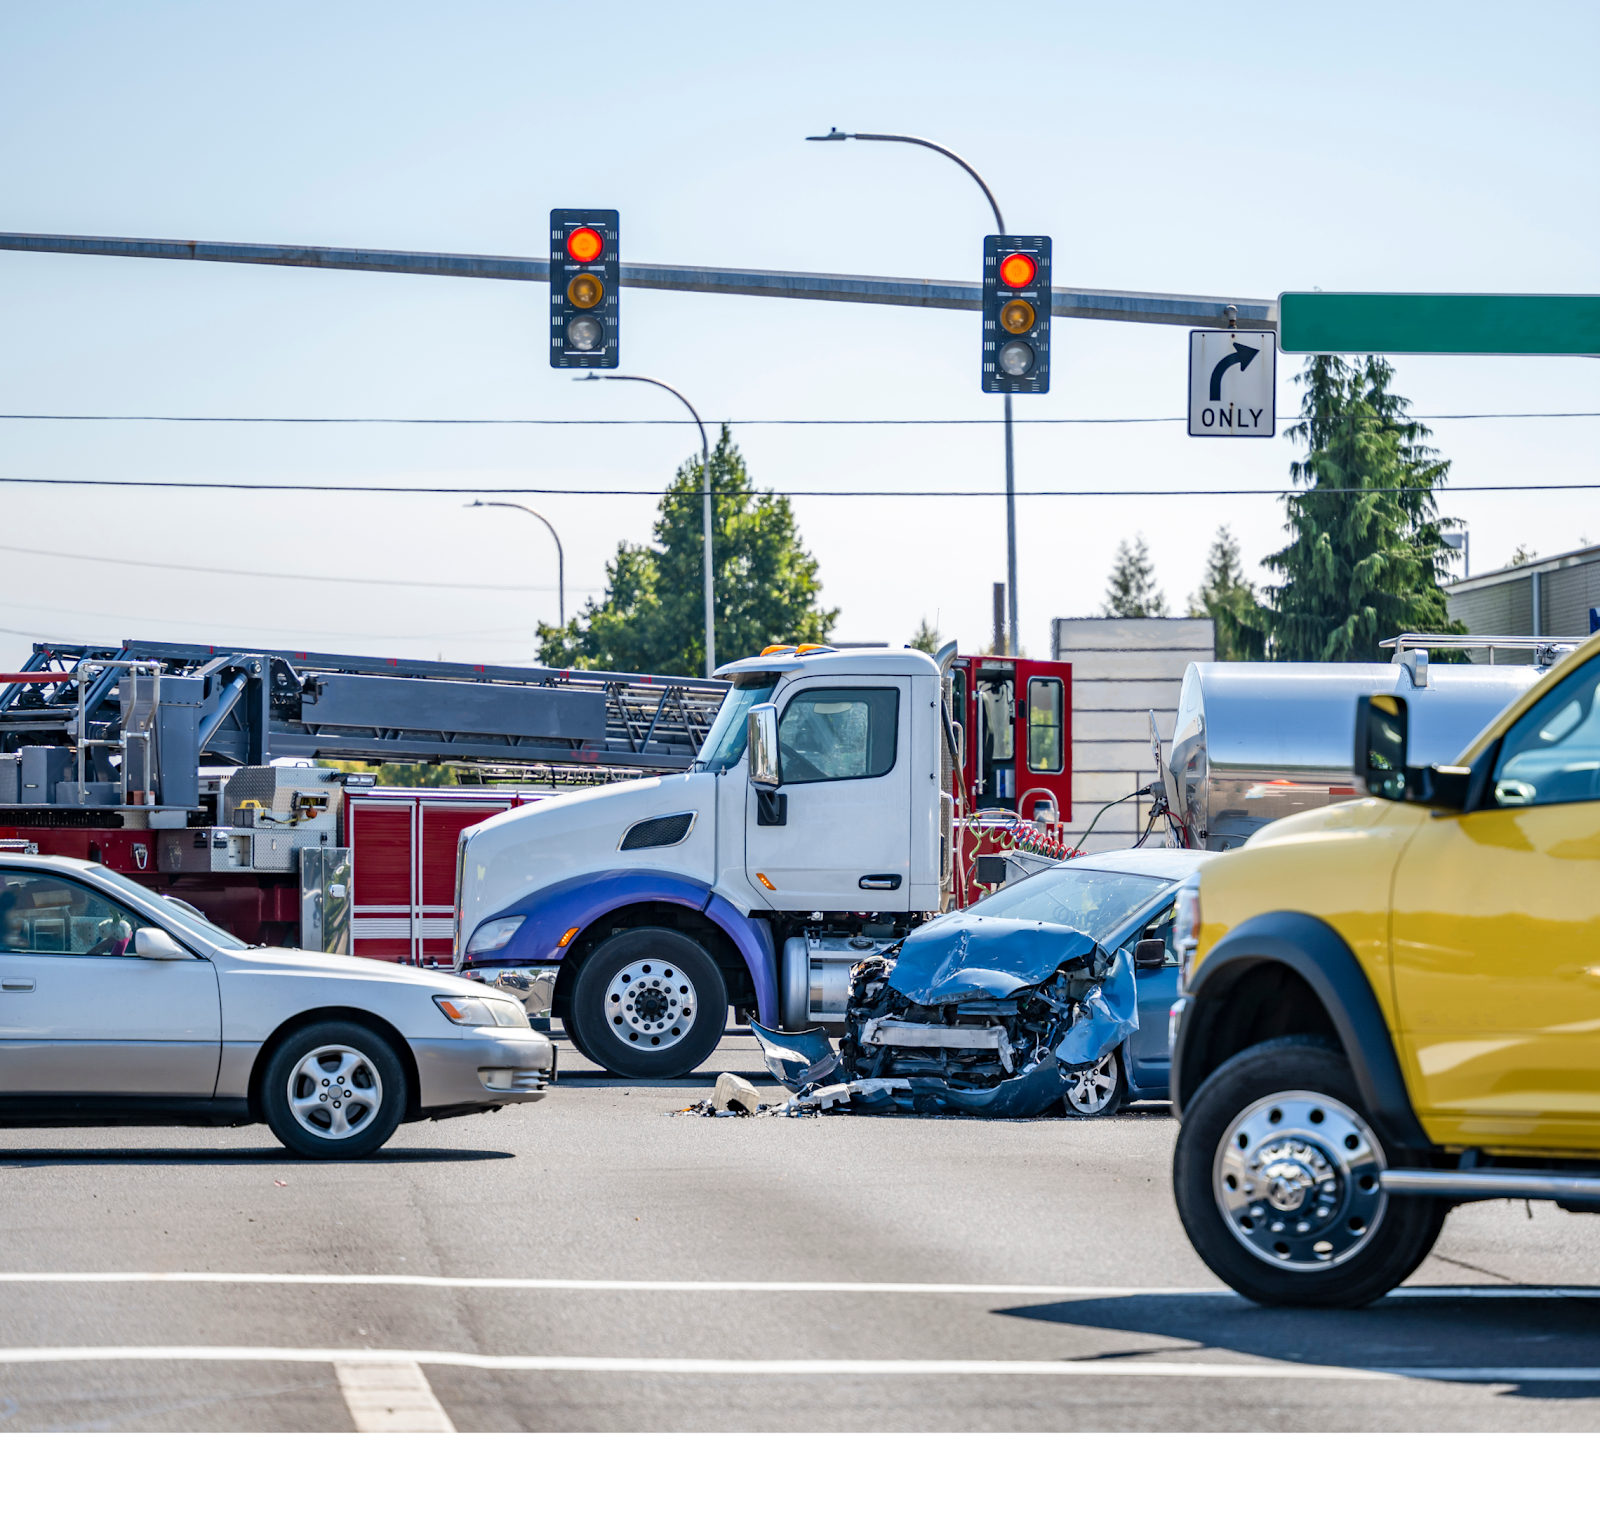 intersection truck accident scene, car accidents